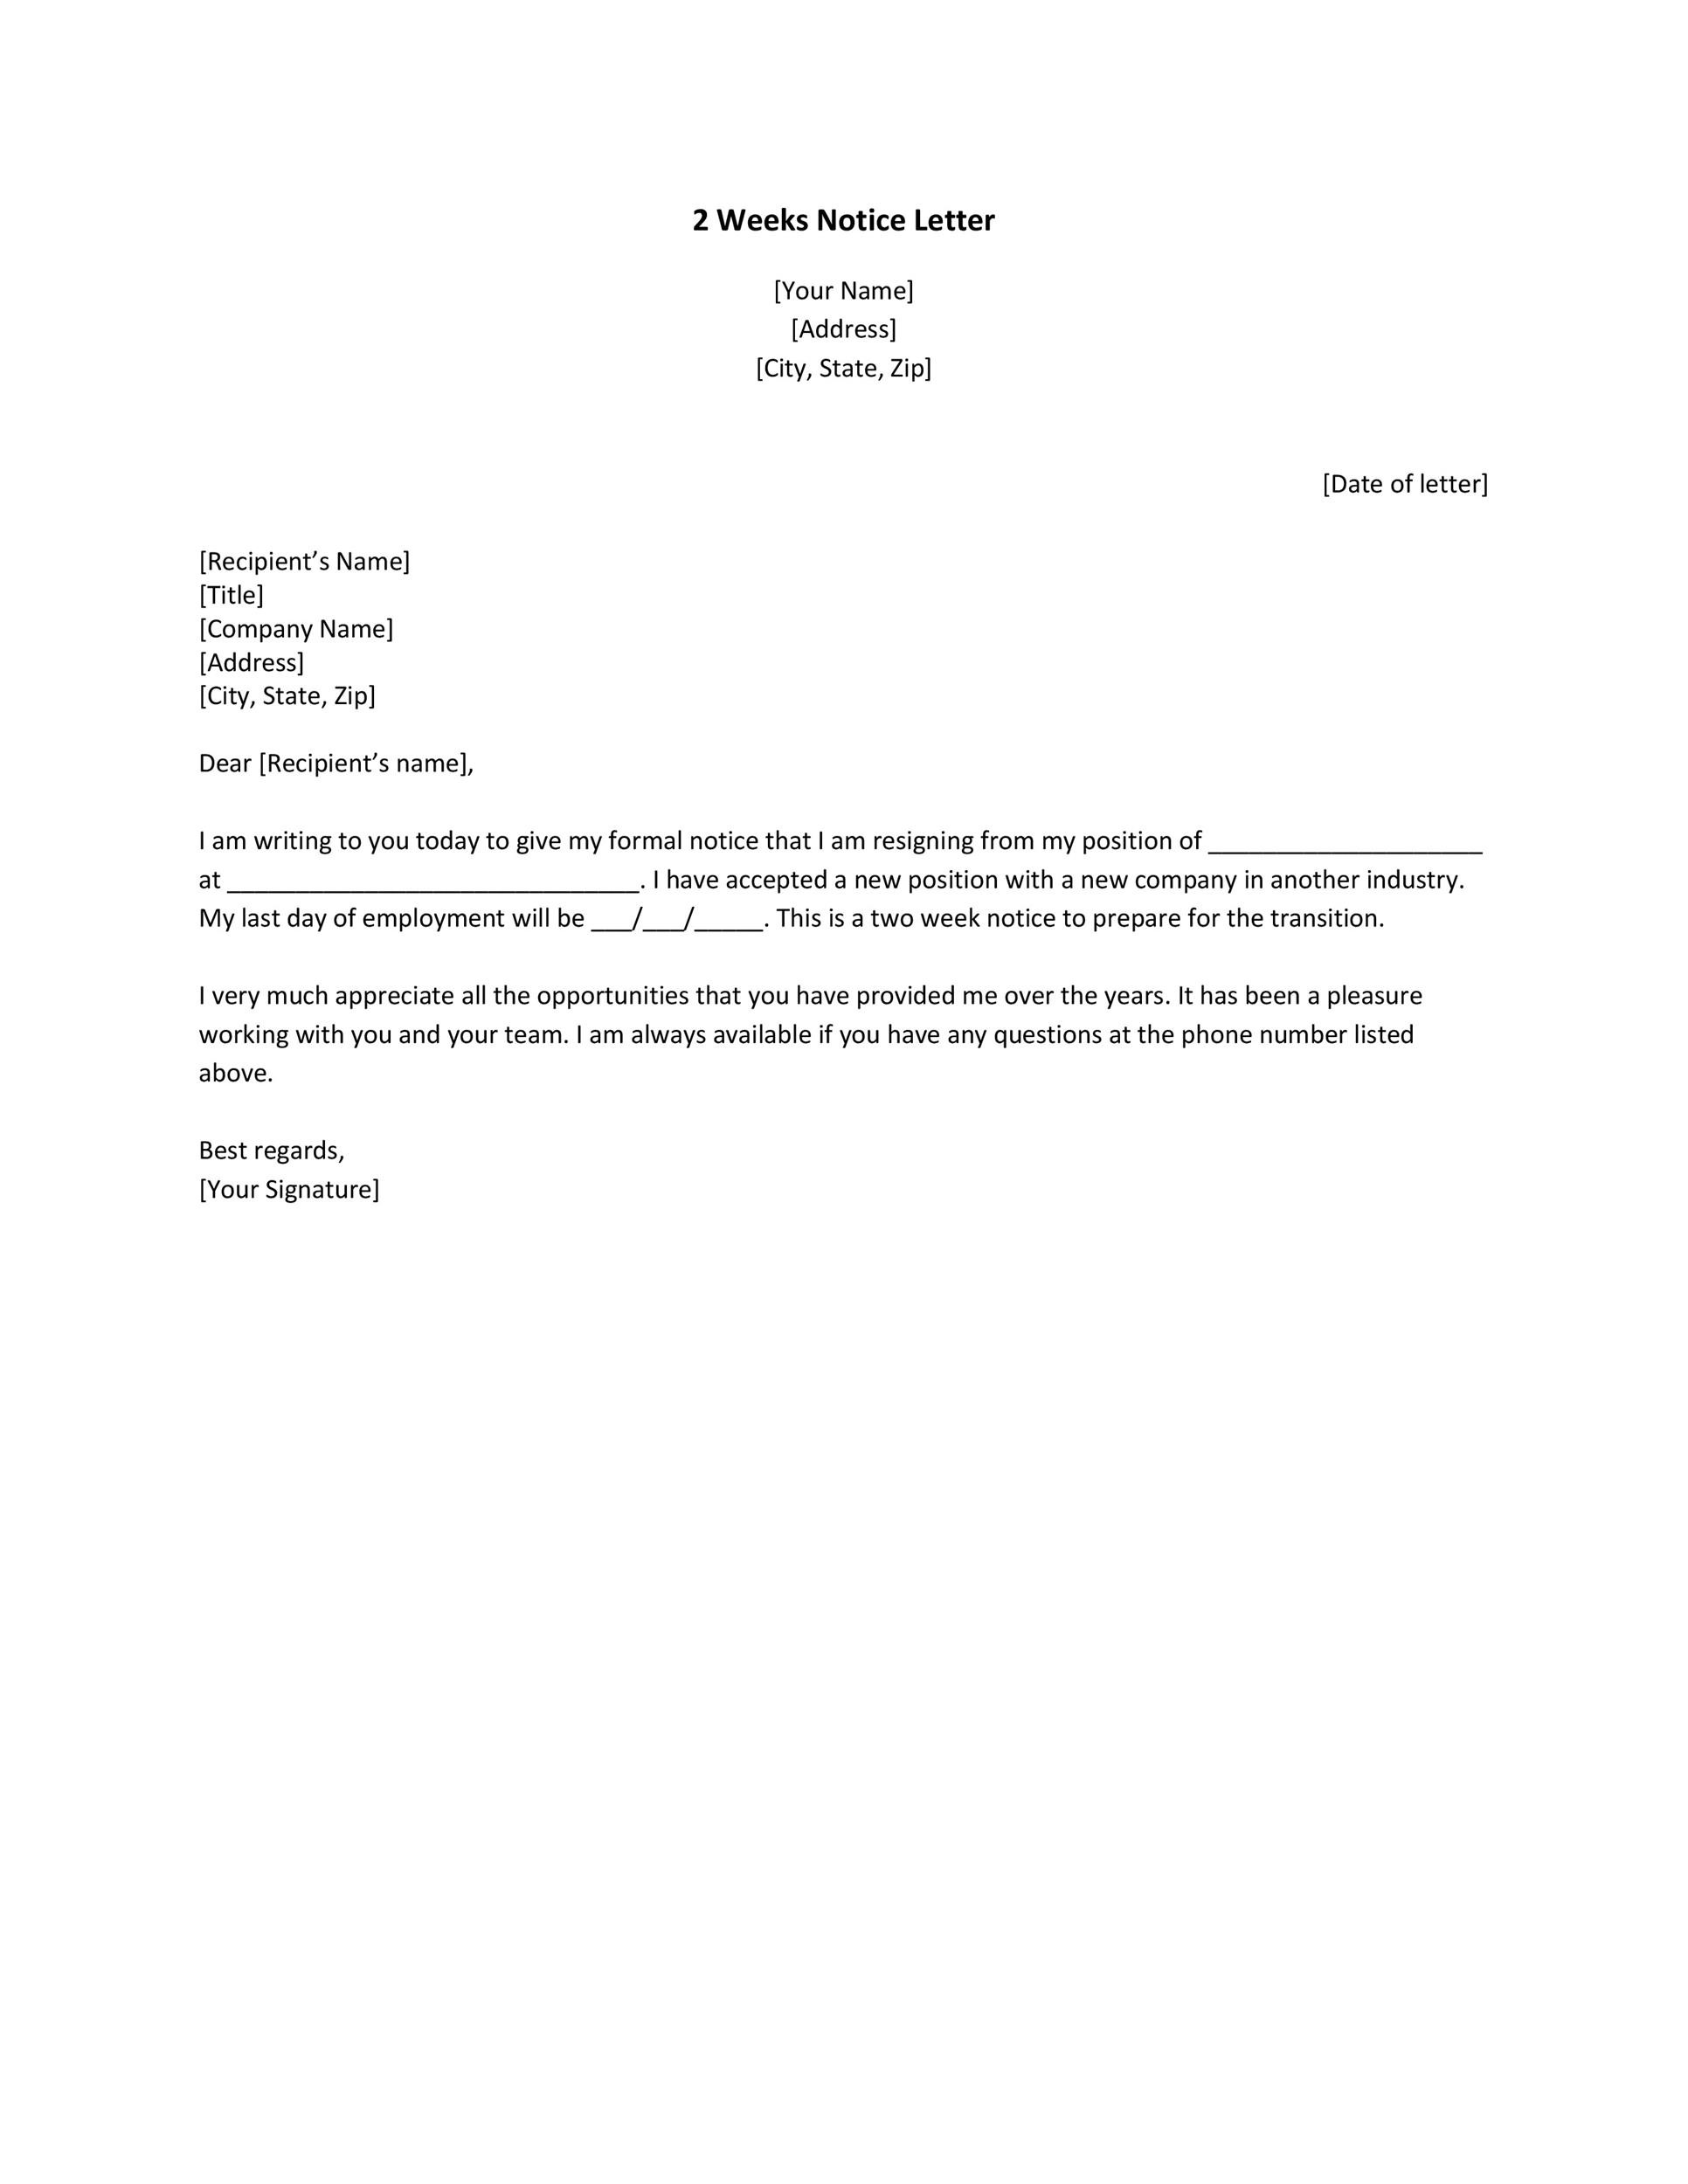 26 Two Weeks Notice Letters & Resignation Letter Templates